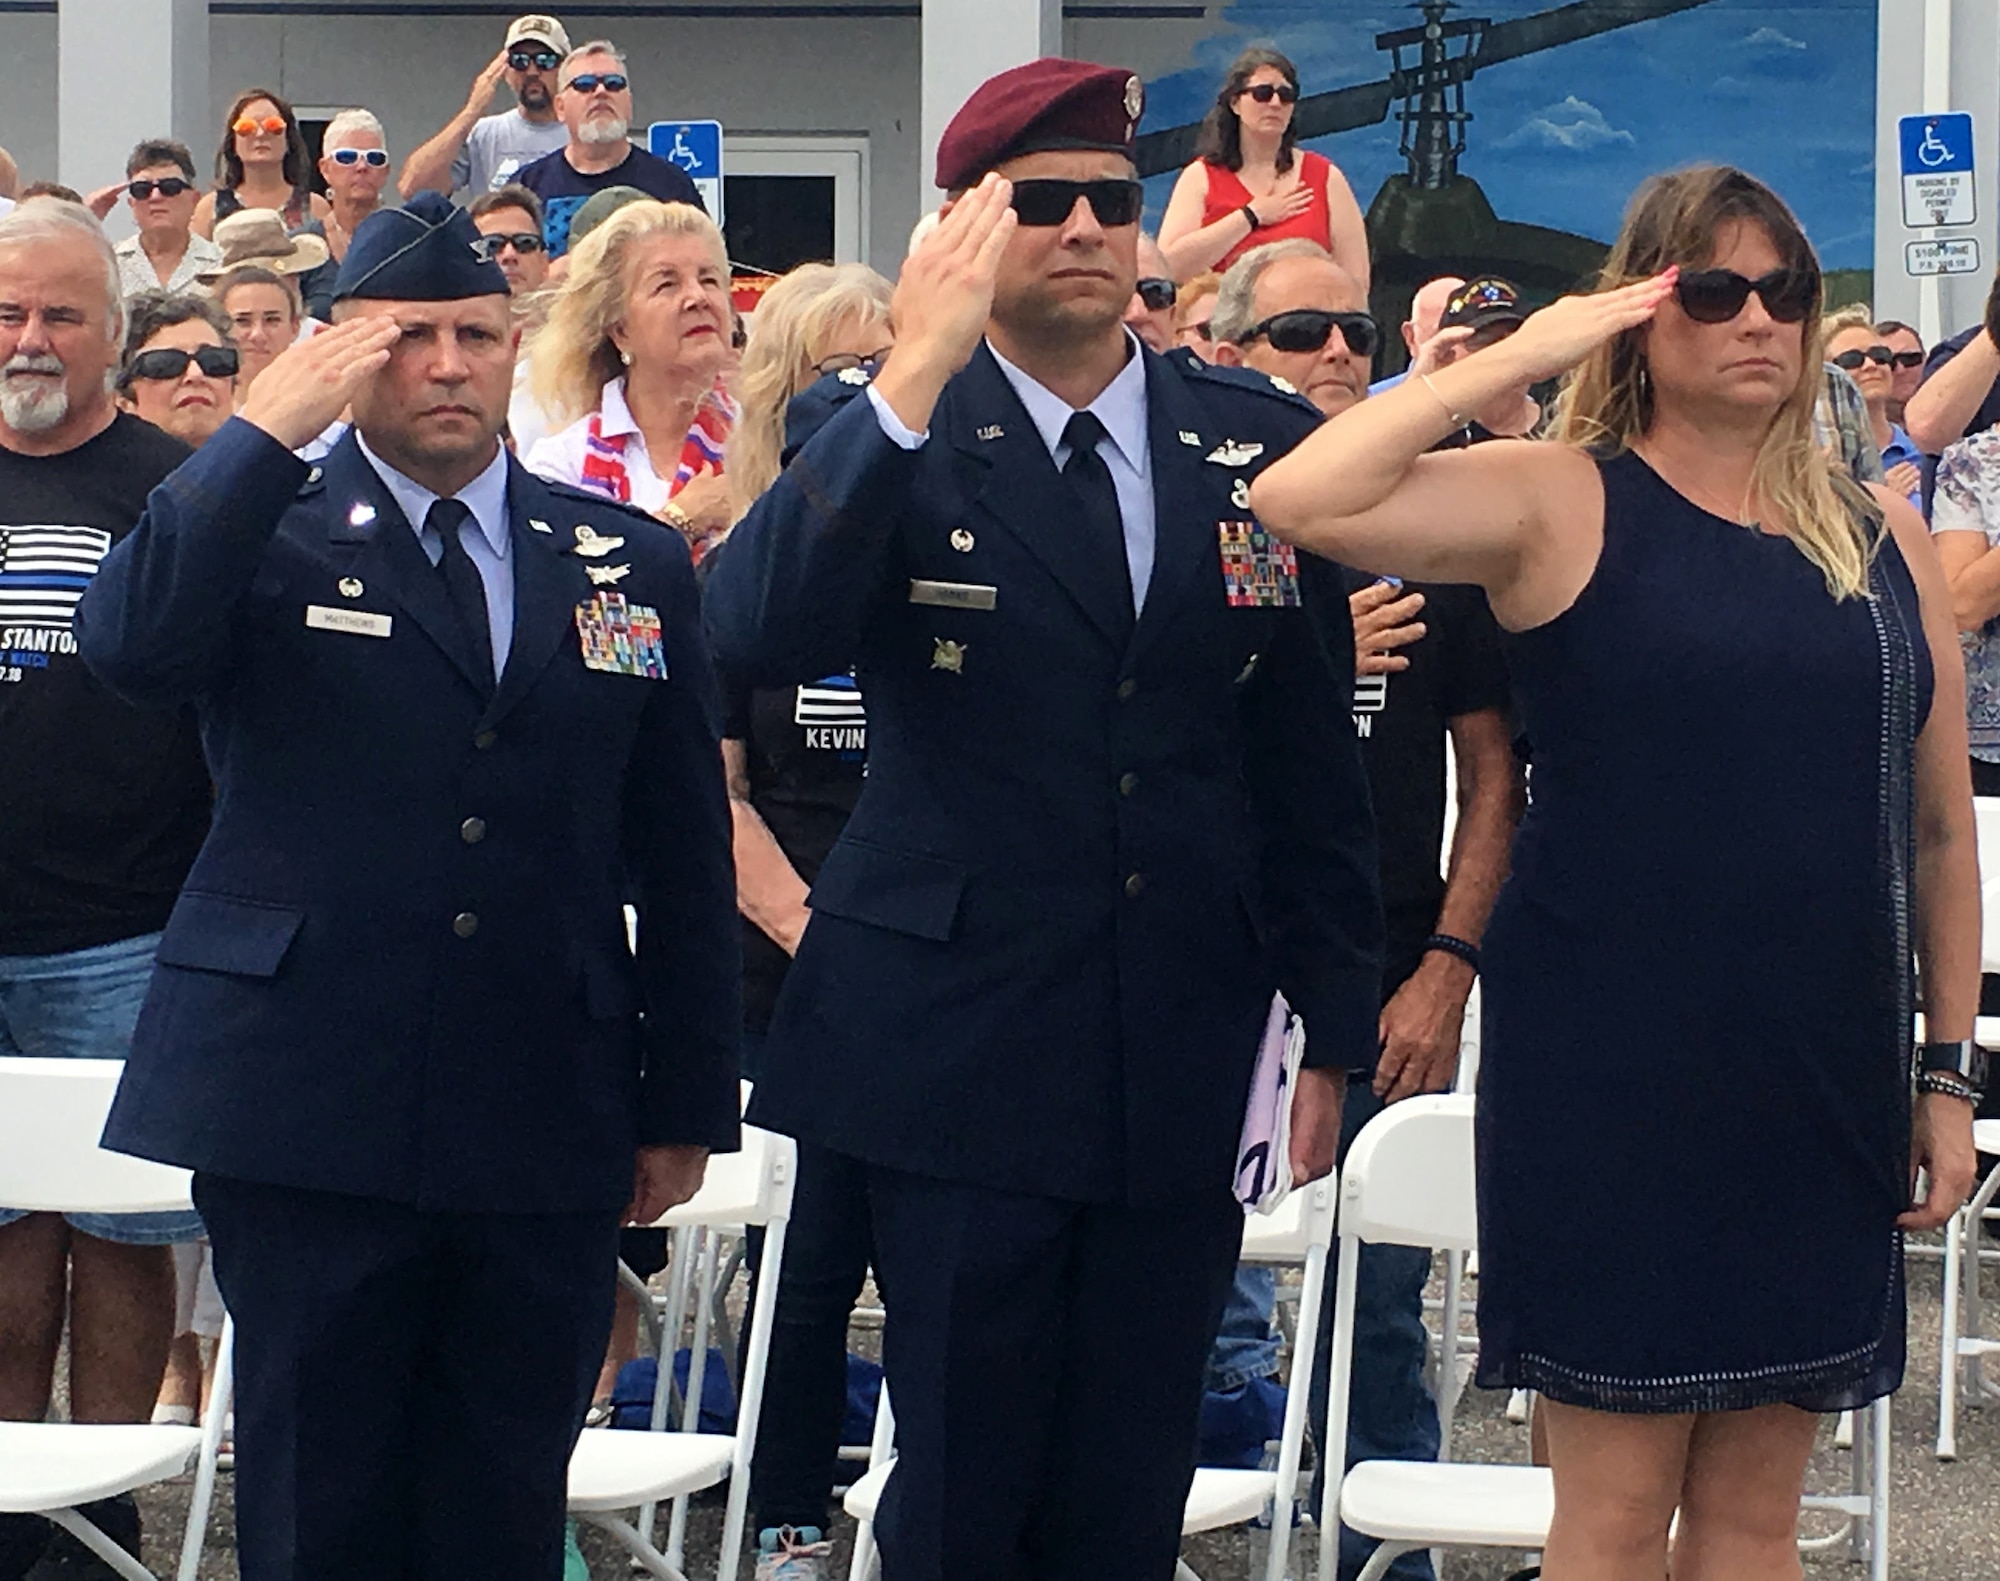 A year-and-a-half into commanding the 920th Rescue Wing and Col. Kurt A. Matthews, shown left, is getting ready to attend his fourth burial. The tragedy of the past year brought Memorial Day 2018 into perspective for 2,000 Reserve Citizen Airmen that serve with the 920th RQW. Matthews honored the lives of four wing members who were lost within the past year, two who were killed in combat March 15, 2018, MSgt. Bill Posch and SSgt. Carl Enis. During the event at the Brevard Veterans Center, Matthews, left; Lt. Col. Tim Hanks, shown center, 308th Rescue Squadron commander, and Hank's wife, Heather Hanks, render a salute to honor the ultimate sacrifice of 308th members Posch and Enis. (U.S. Air Force photo by Mr. Darrell Hankins)